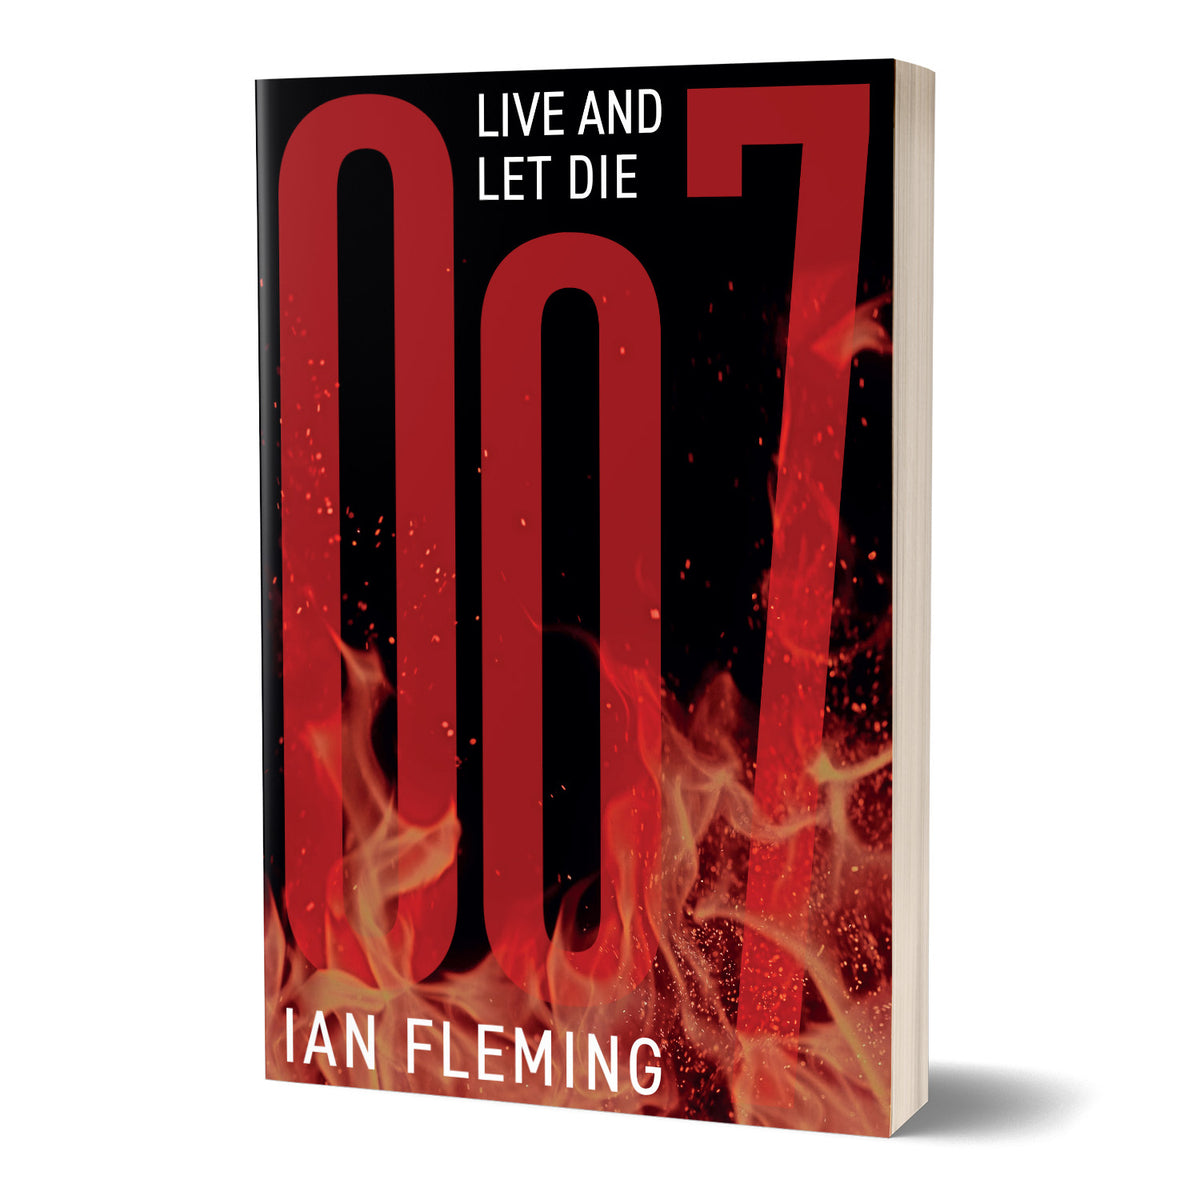 James Bond Live And Let Die Book - By Ian Fleming